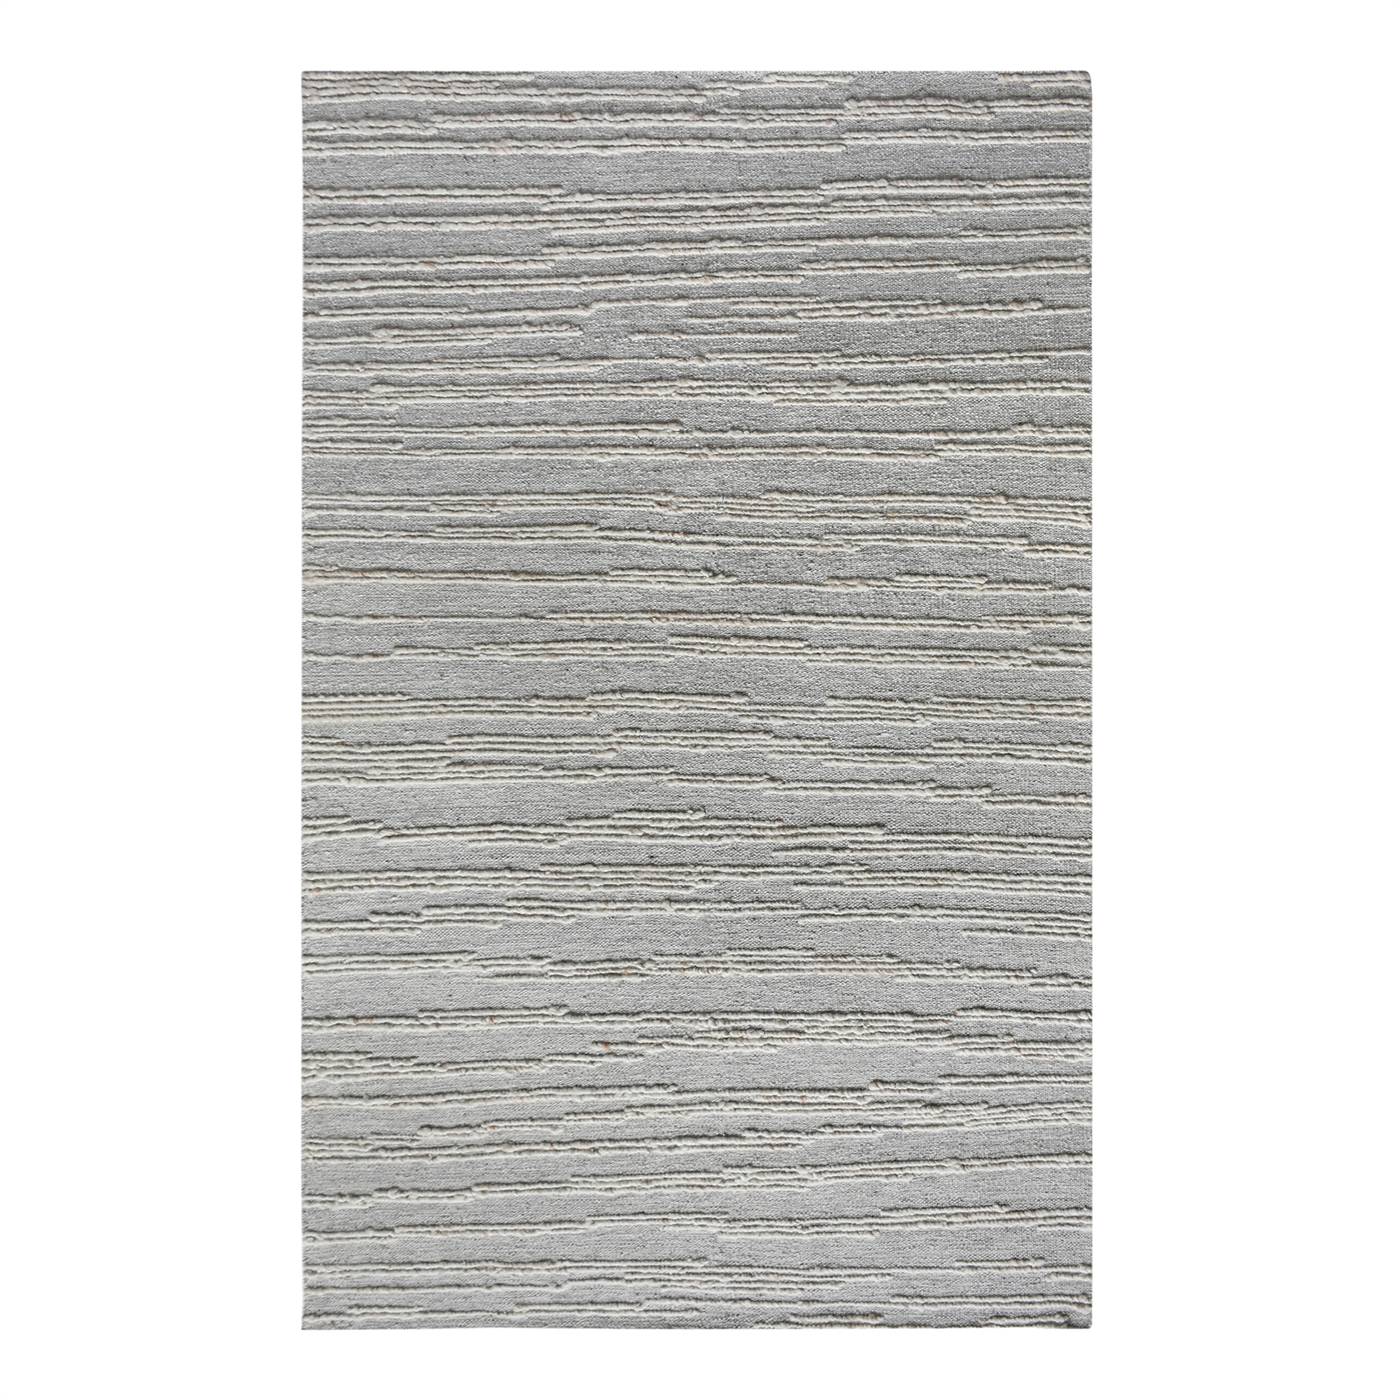 Area Rug, Bedroom Rug, Living Room Rug, Living Area Rug, Indian Rug, Office Carpet, Office Rug, Shop Rug Online, Grey, Natural White , Wool, Hand Knotted , Handknotted, Flat Weave, Intricate